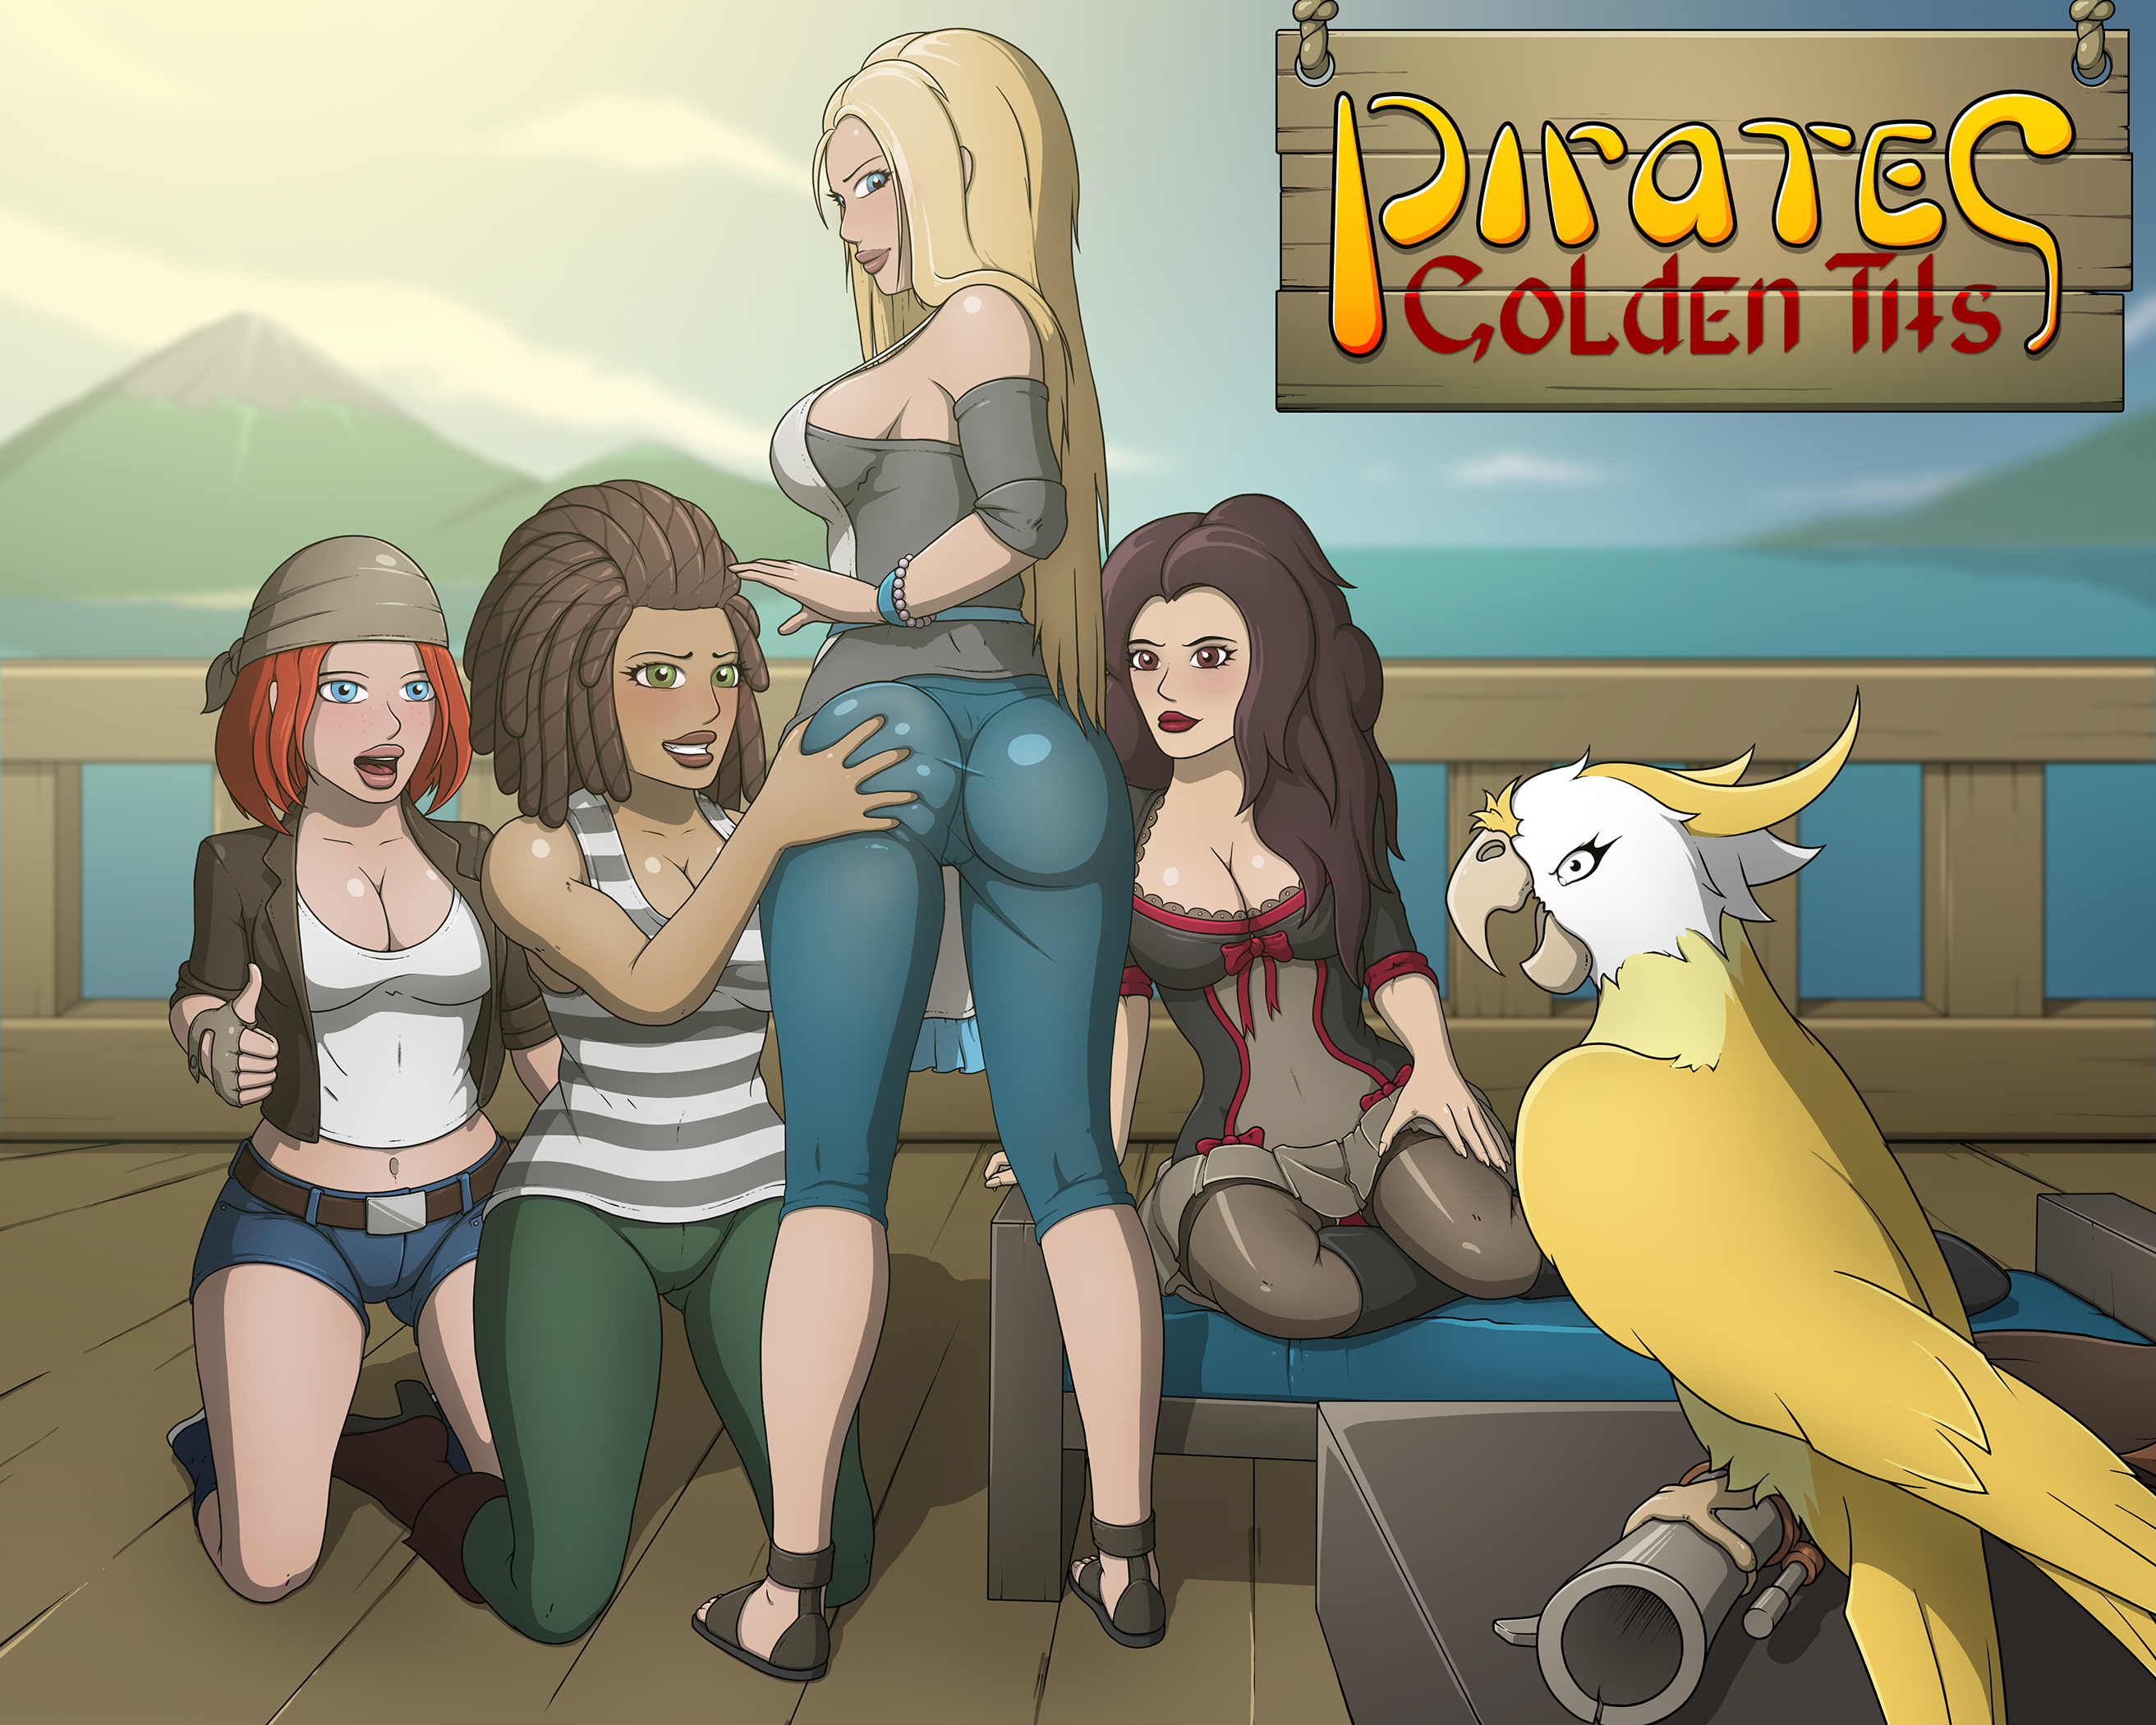 Pirates : Golden Tits (0.23) [NSFW] 18+ by Hot Bunny